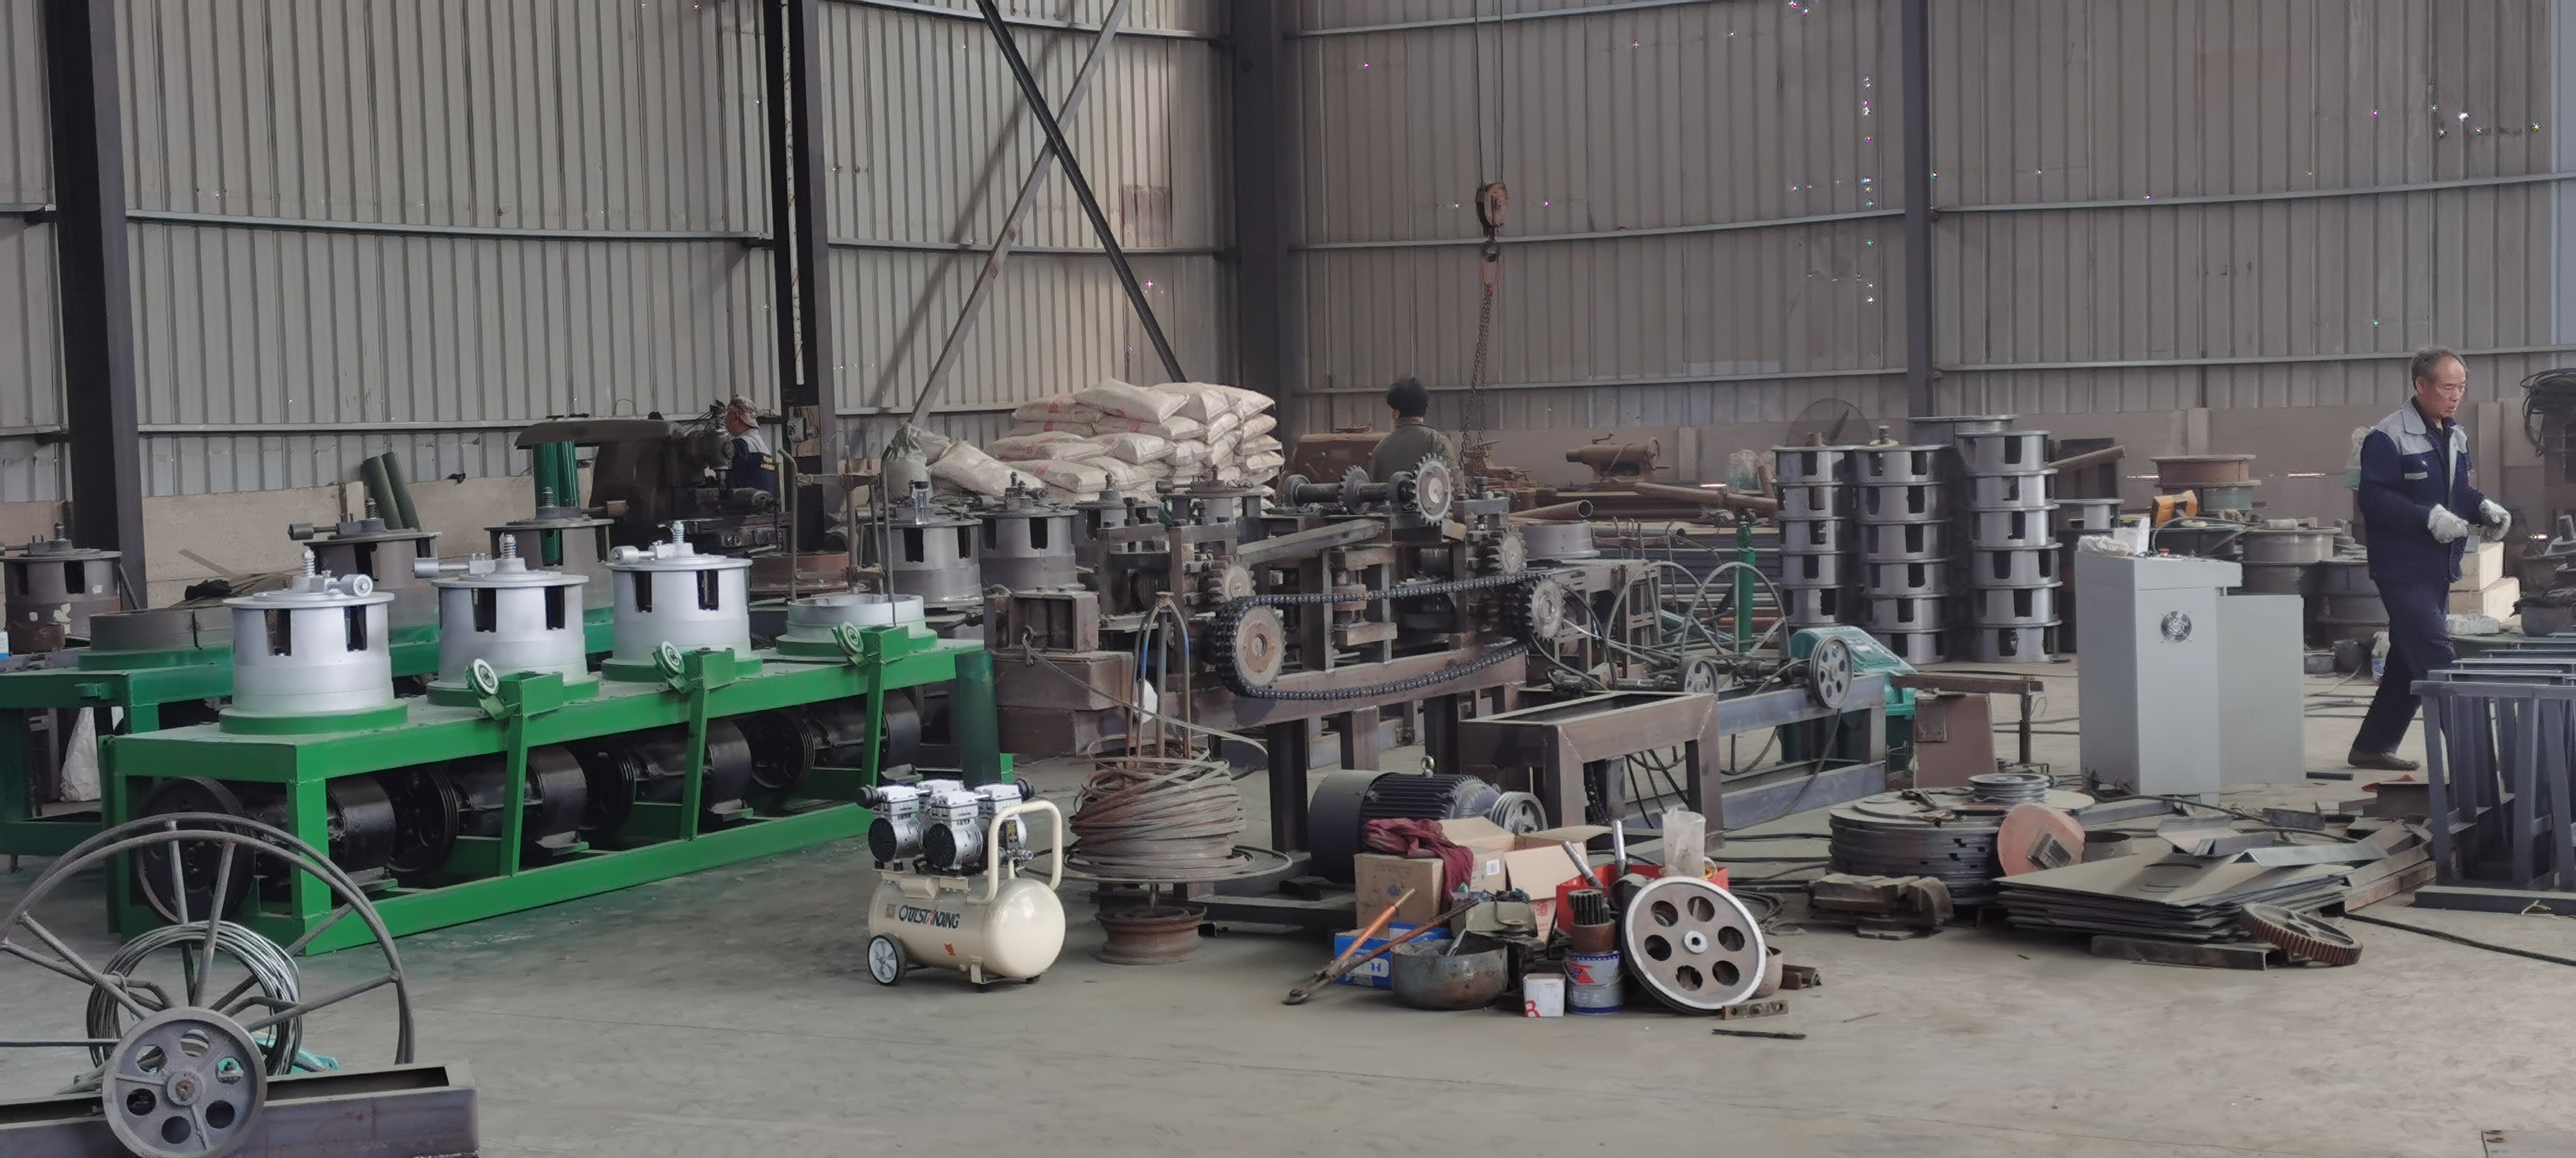 Vertical Pulley Type Steel Wire Drawing Machine With 4 Drums, Barrels and Blocks